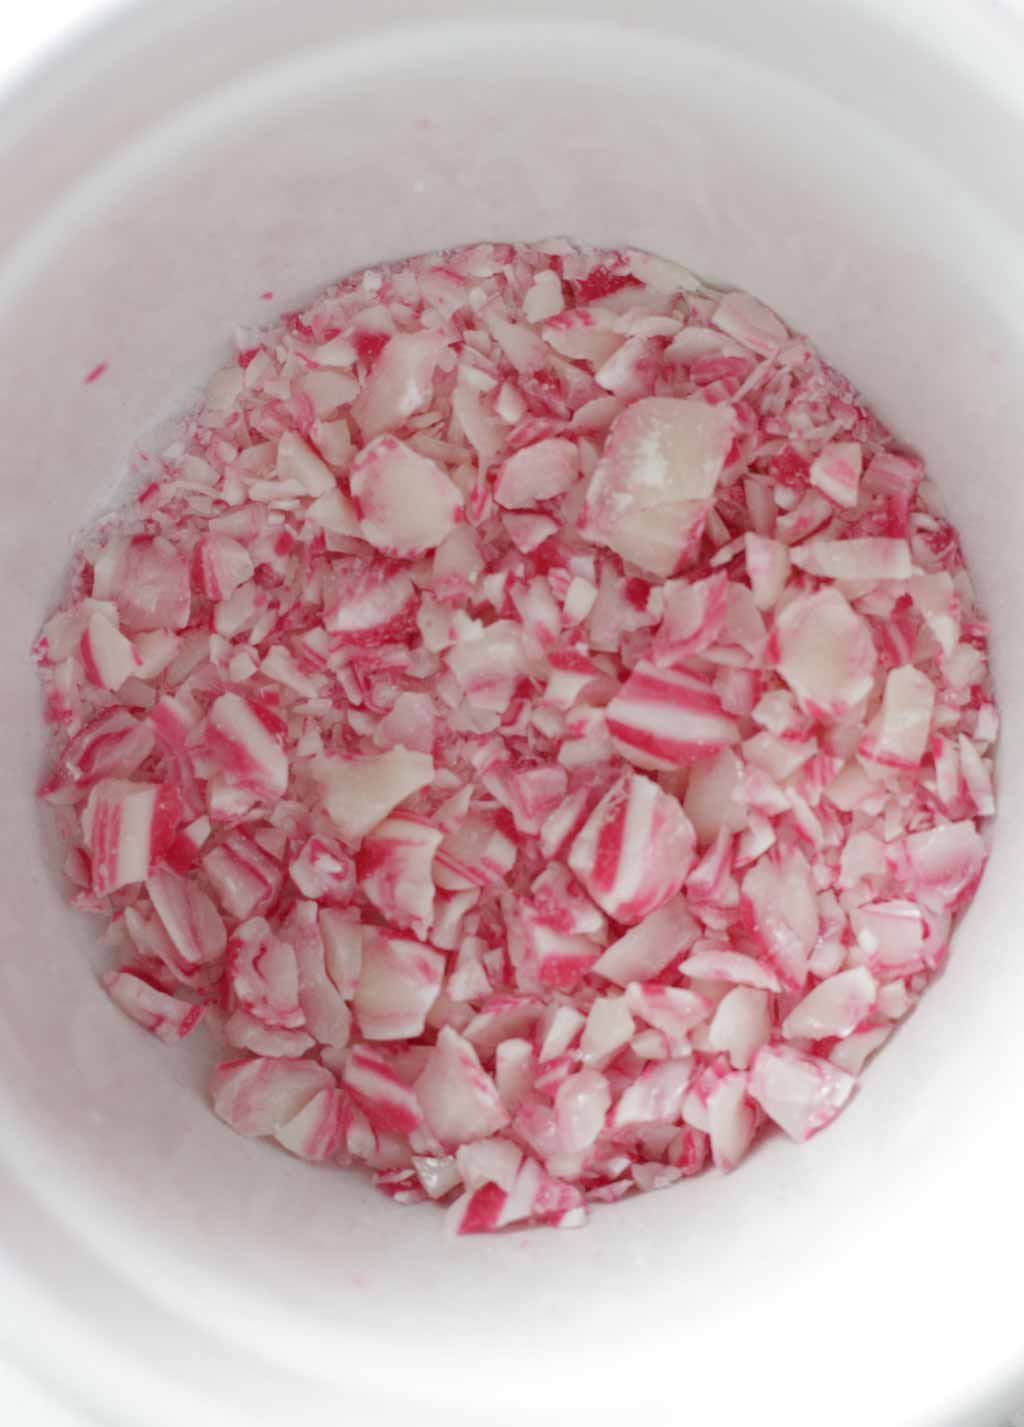 Crushed Candy Canes In A Small Bowl